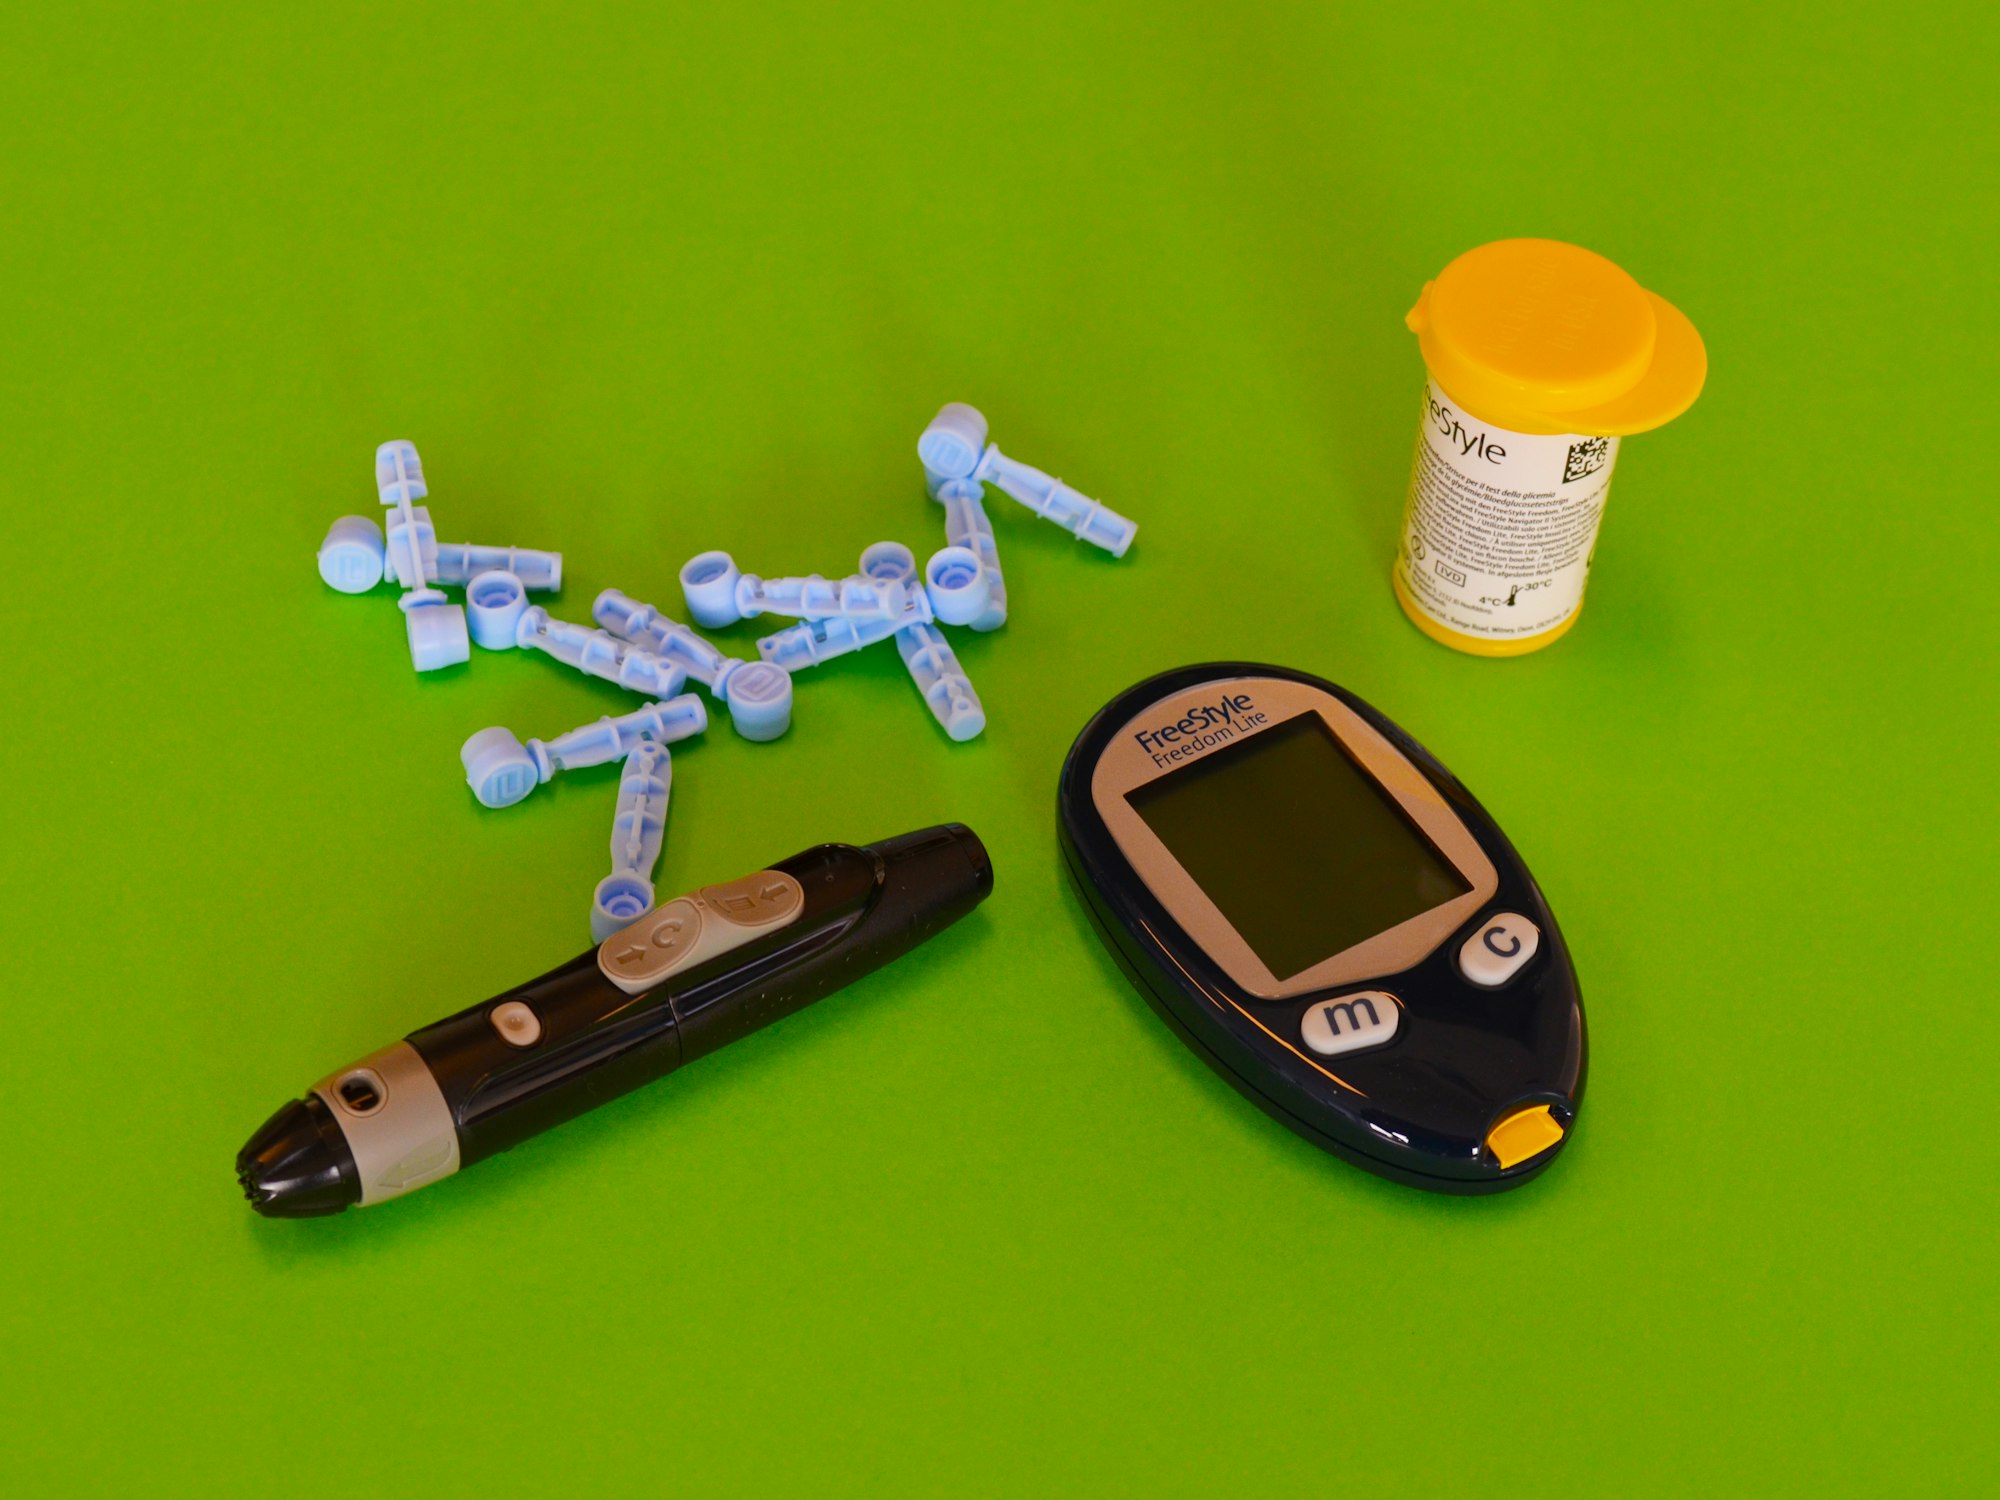 Addressing Diabetes Treatment and Management: Making Insulin Affordable